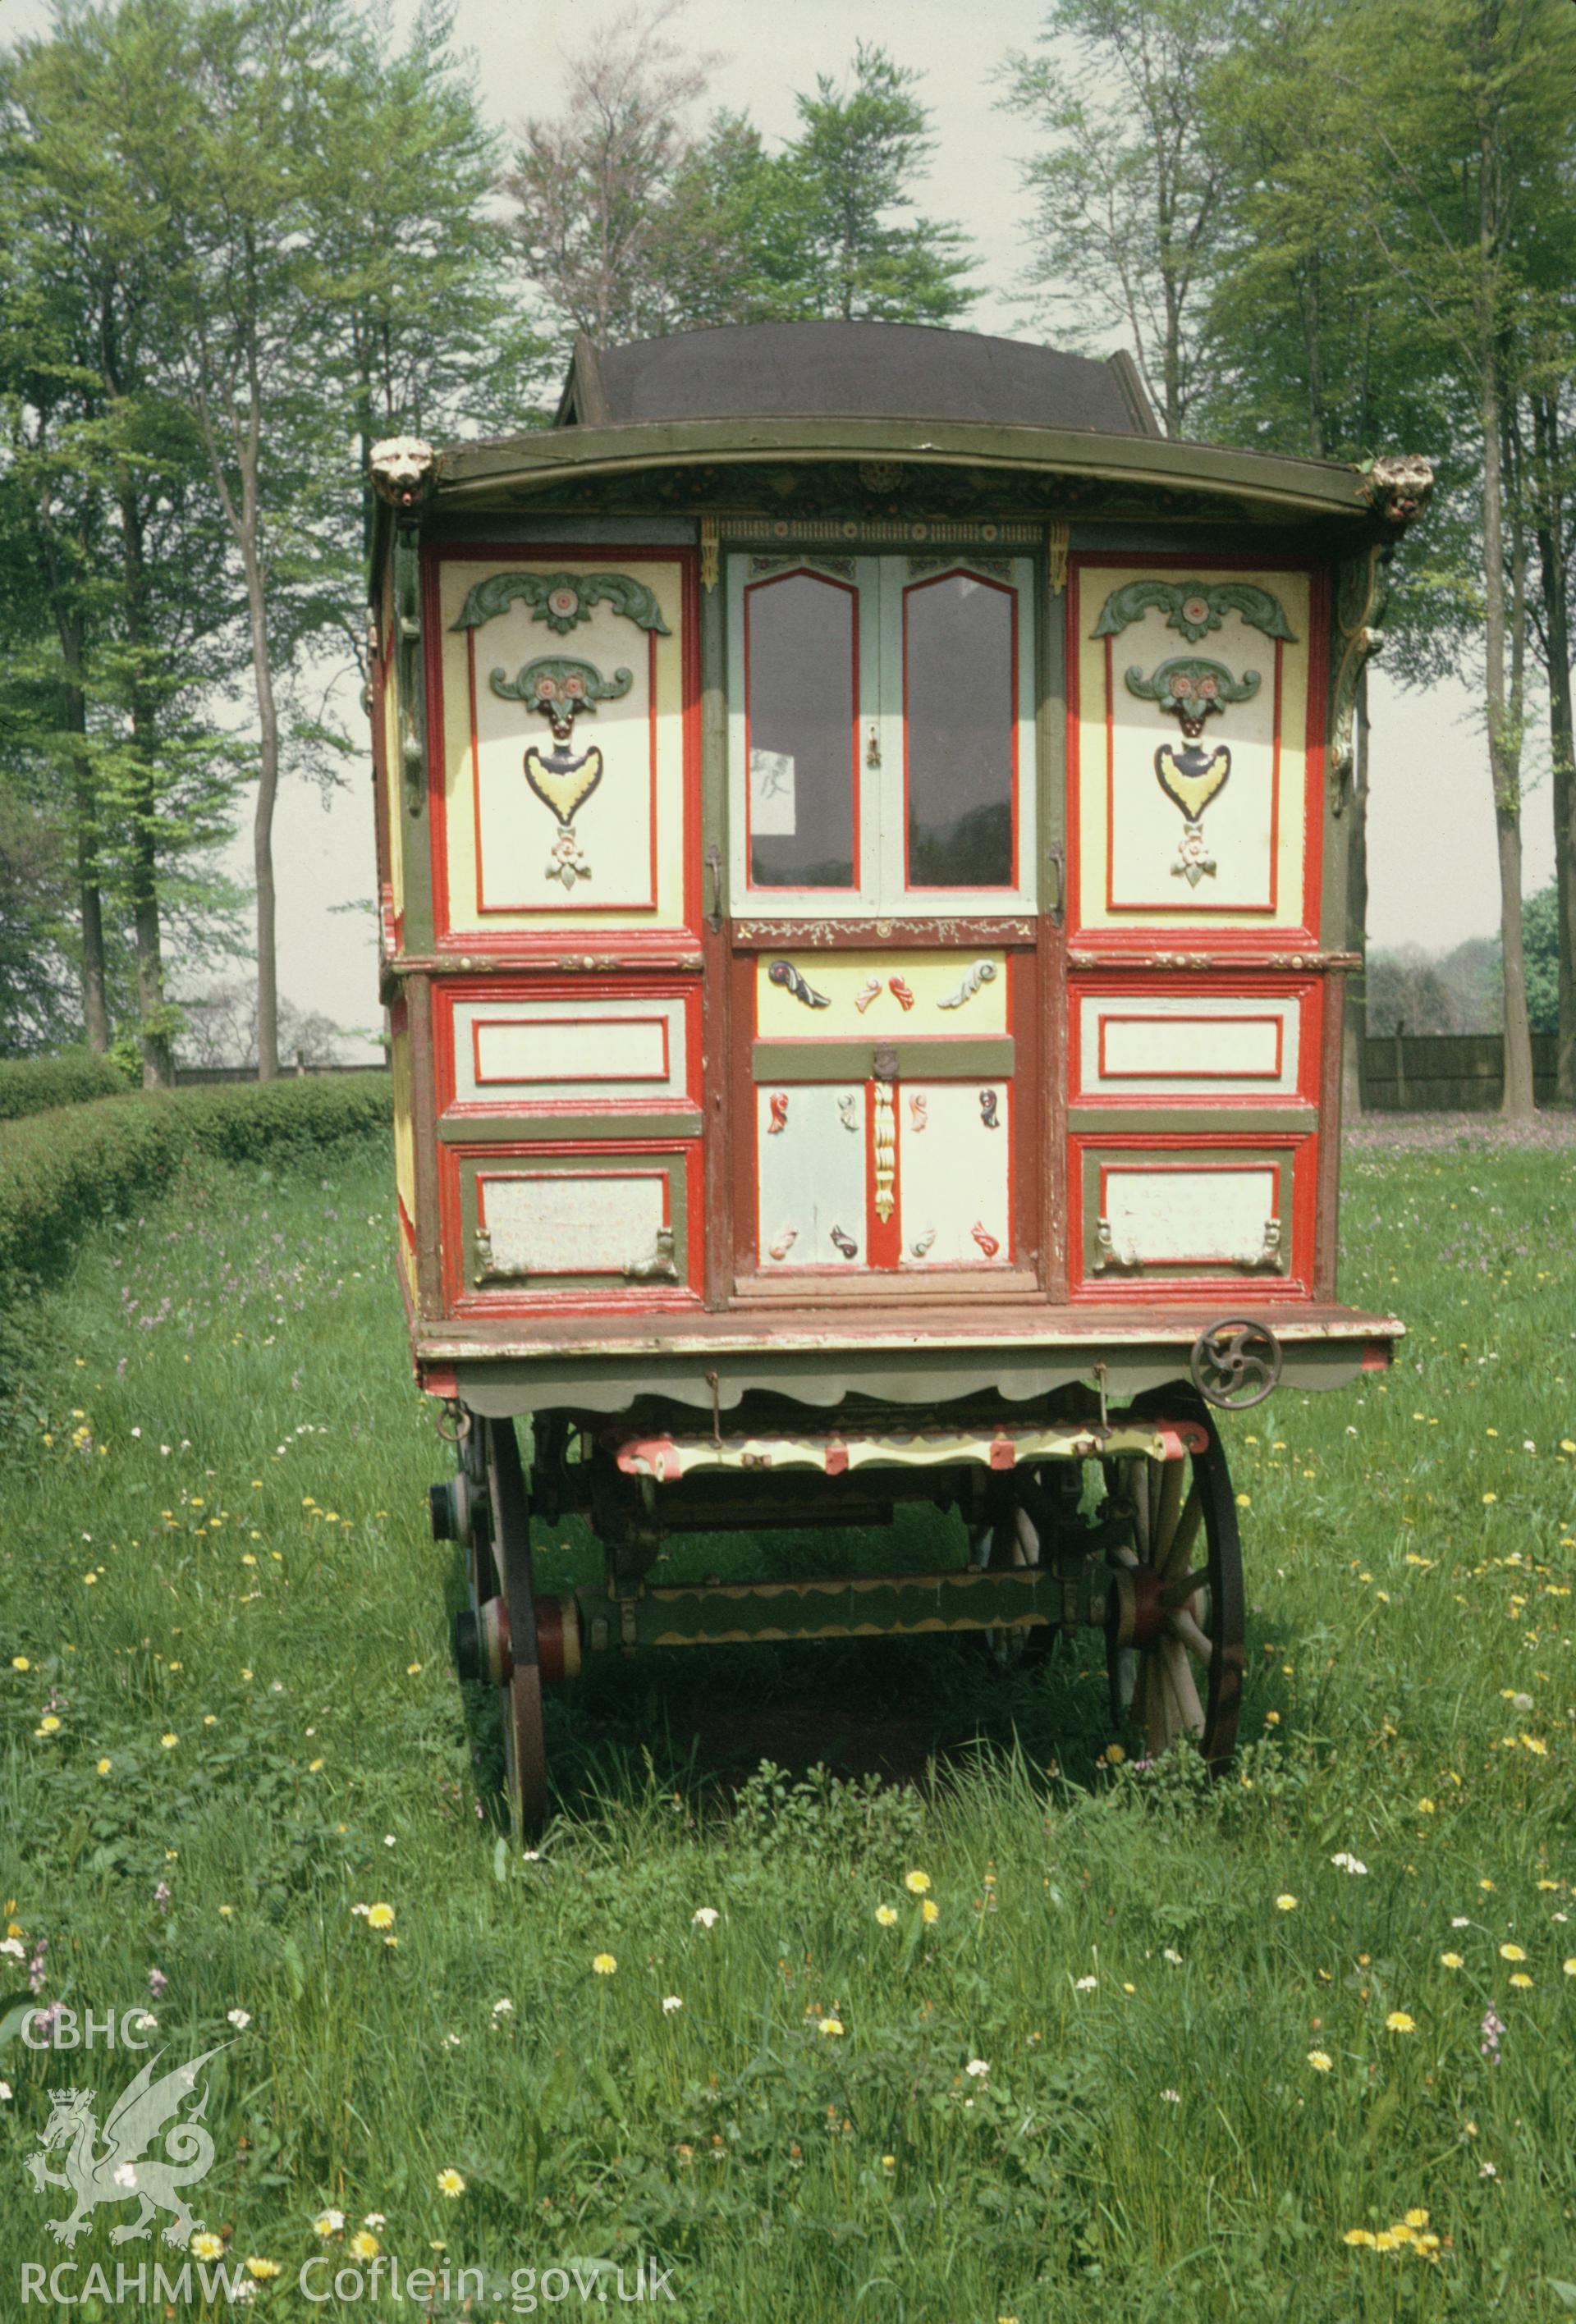 35mm colour slide showing a caravan exhibit at St Fagans Museum, Glamorgn by Dylan Roberts.